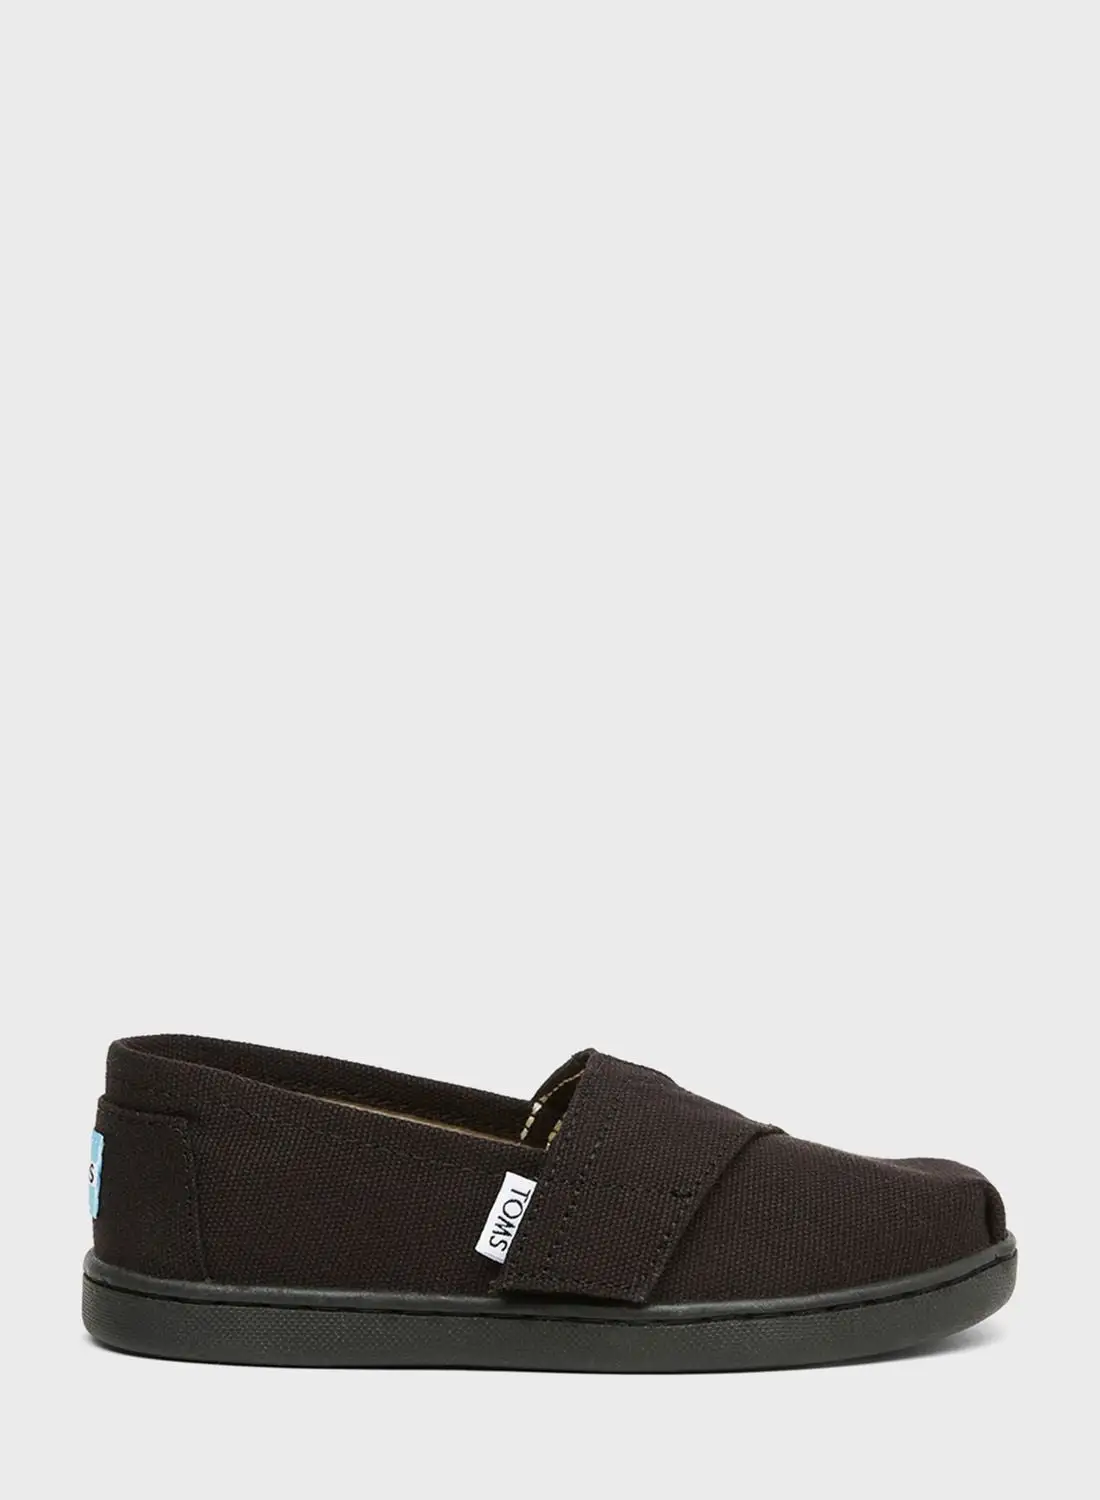 TOMS Kids Classic Slip-Ons Loafers